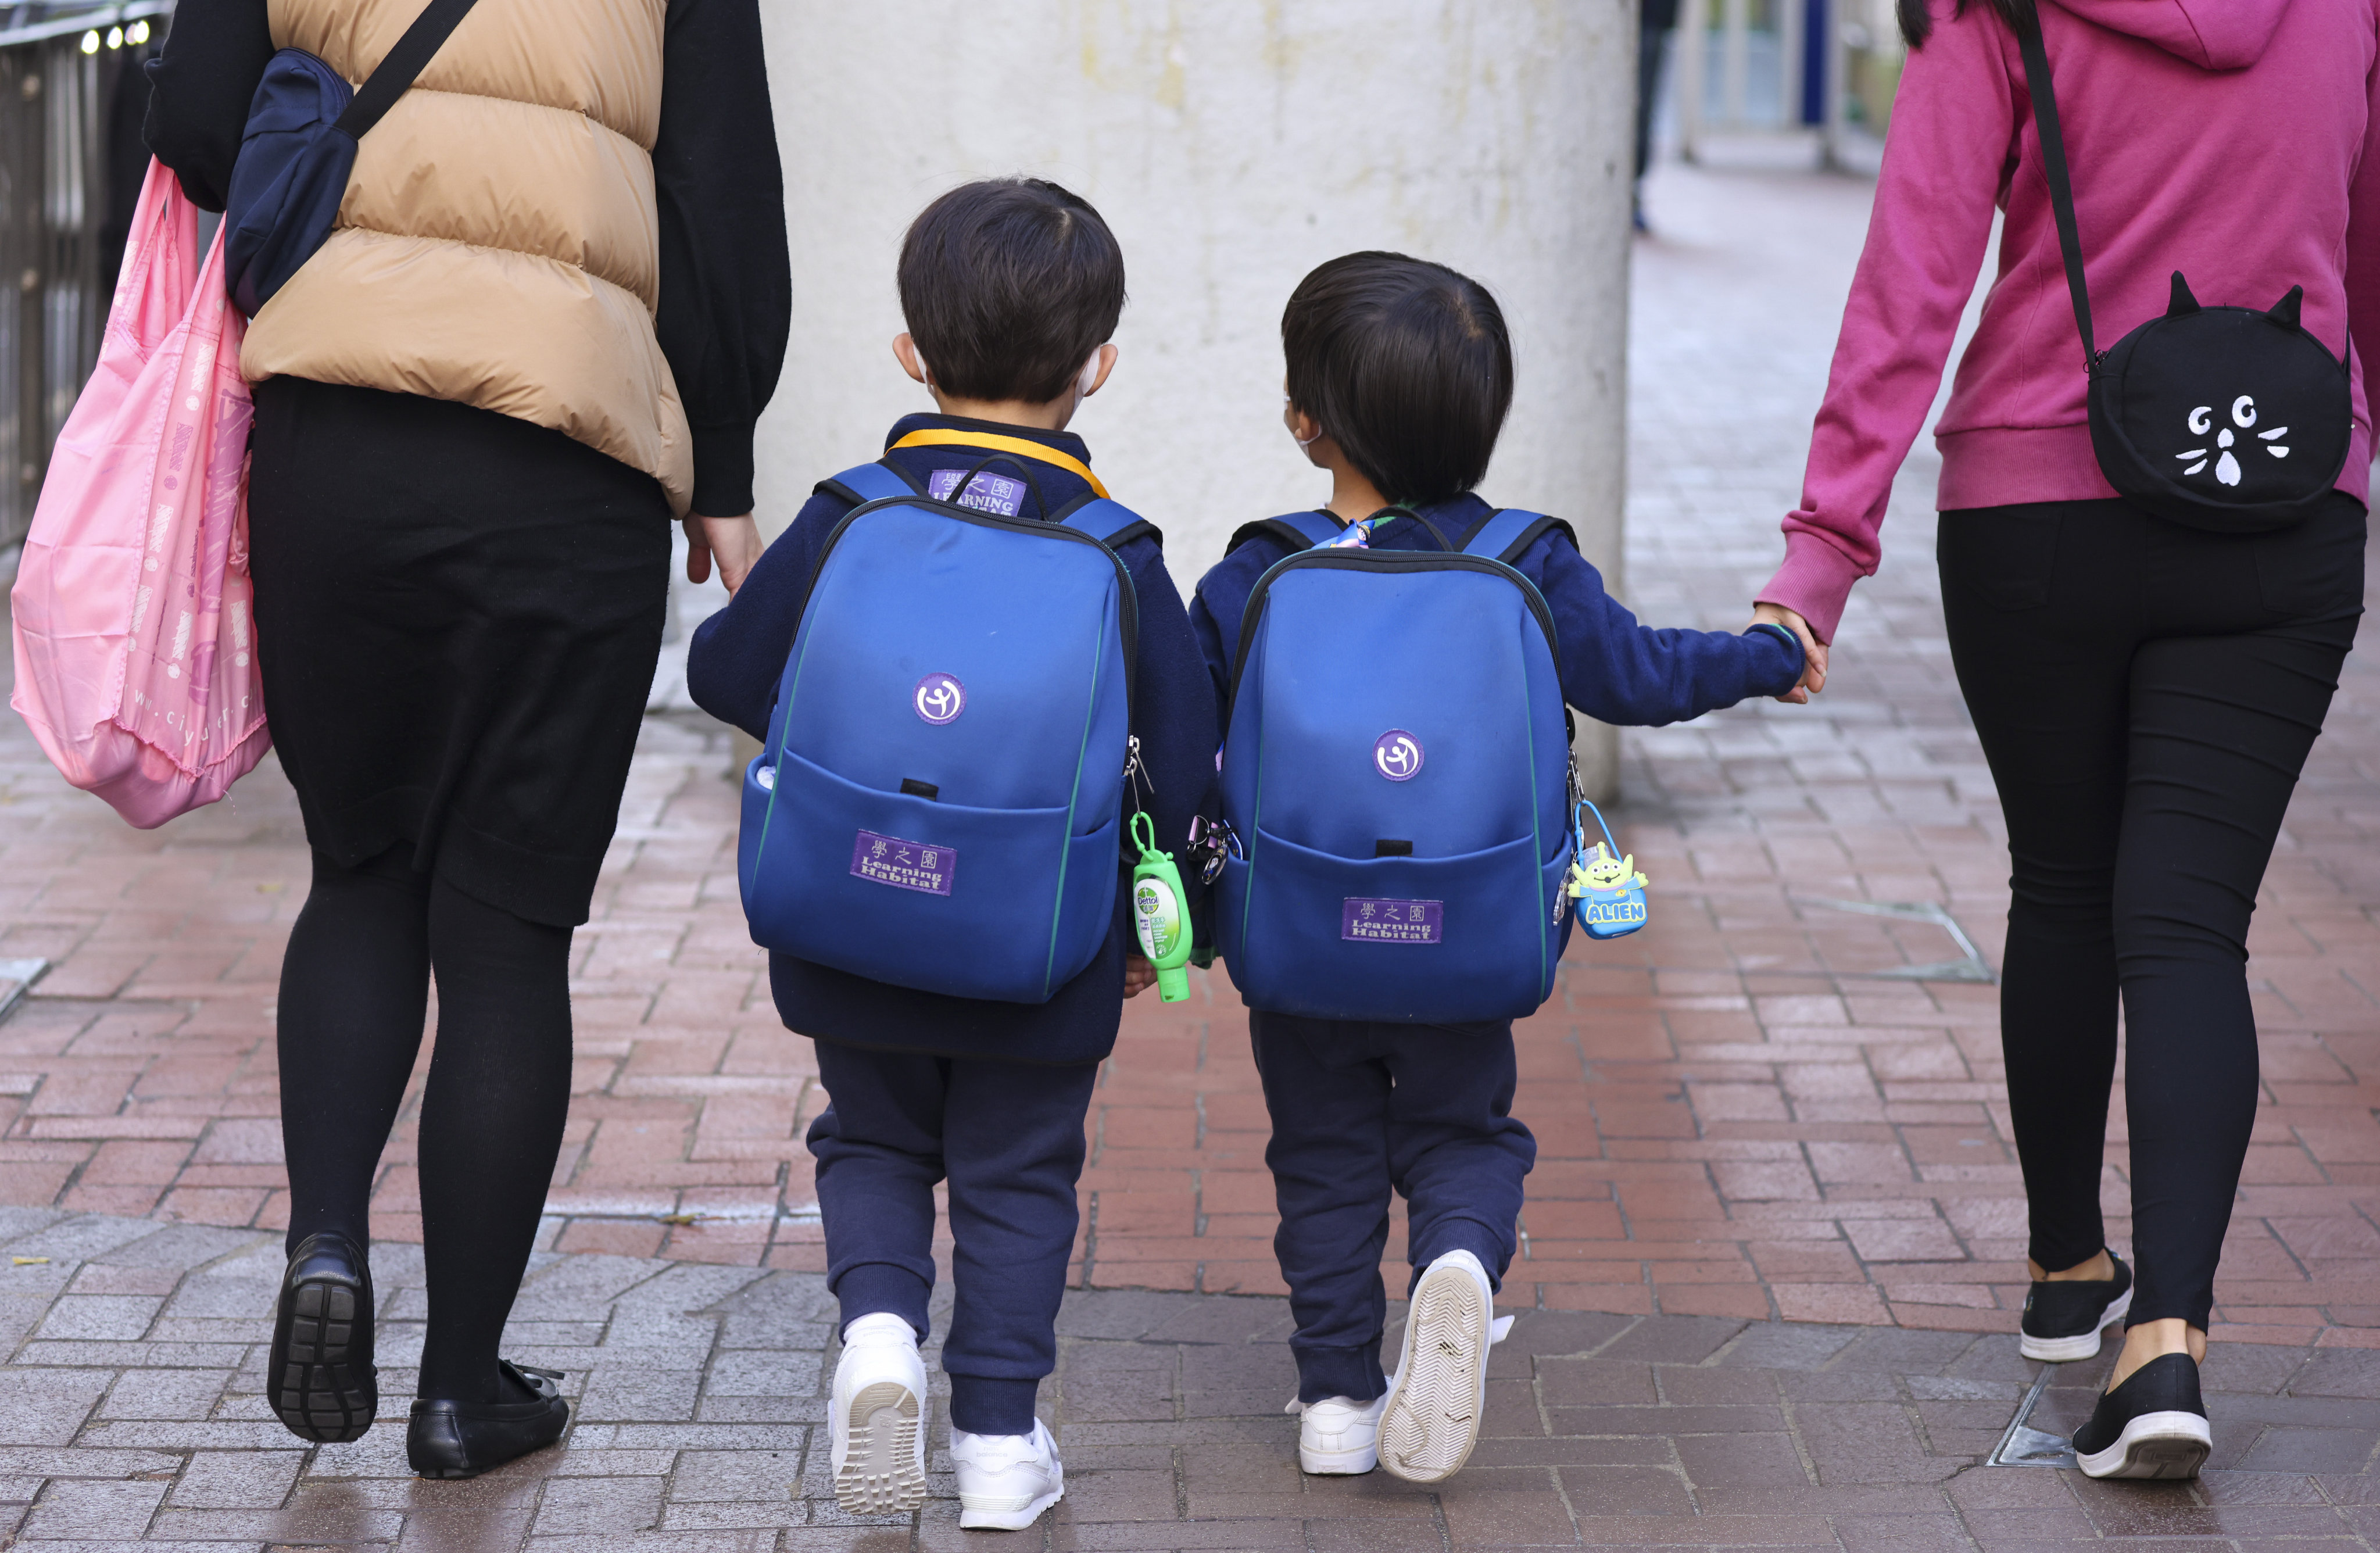 Hong Kong leader Carrie Lam on Wednesday urged parents to get their children vaccinated so full-day, in-person classes could resume. Photo: Nora Tam